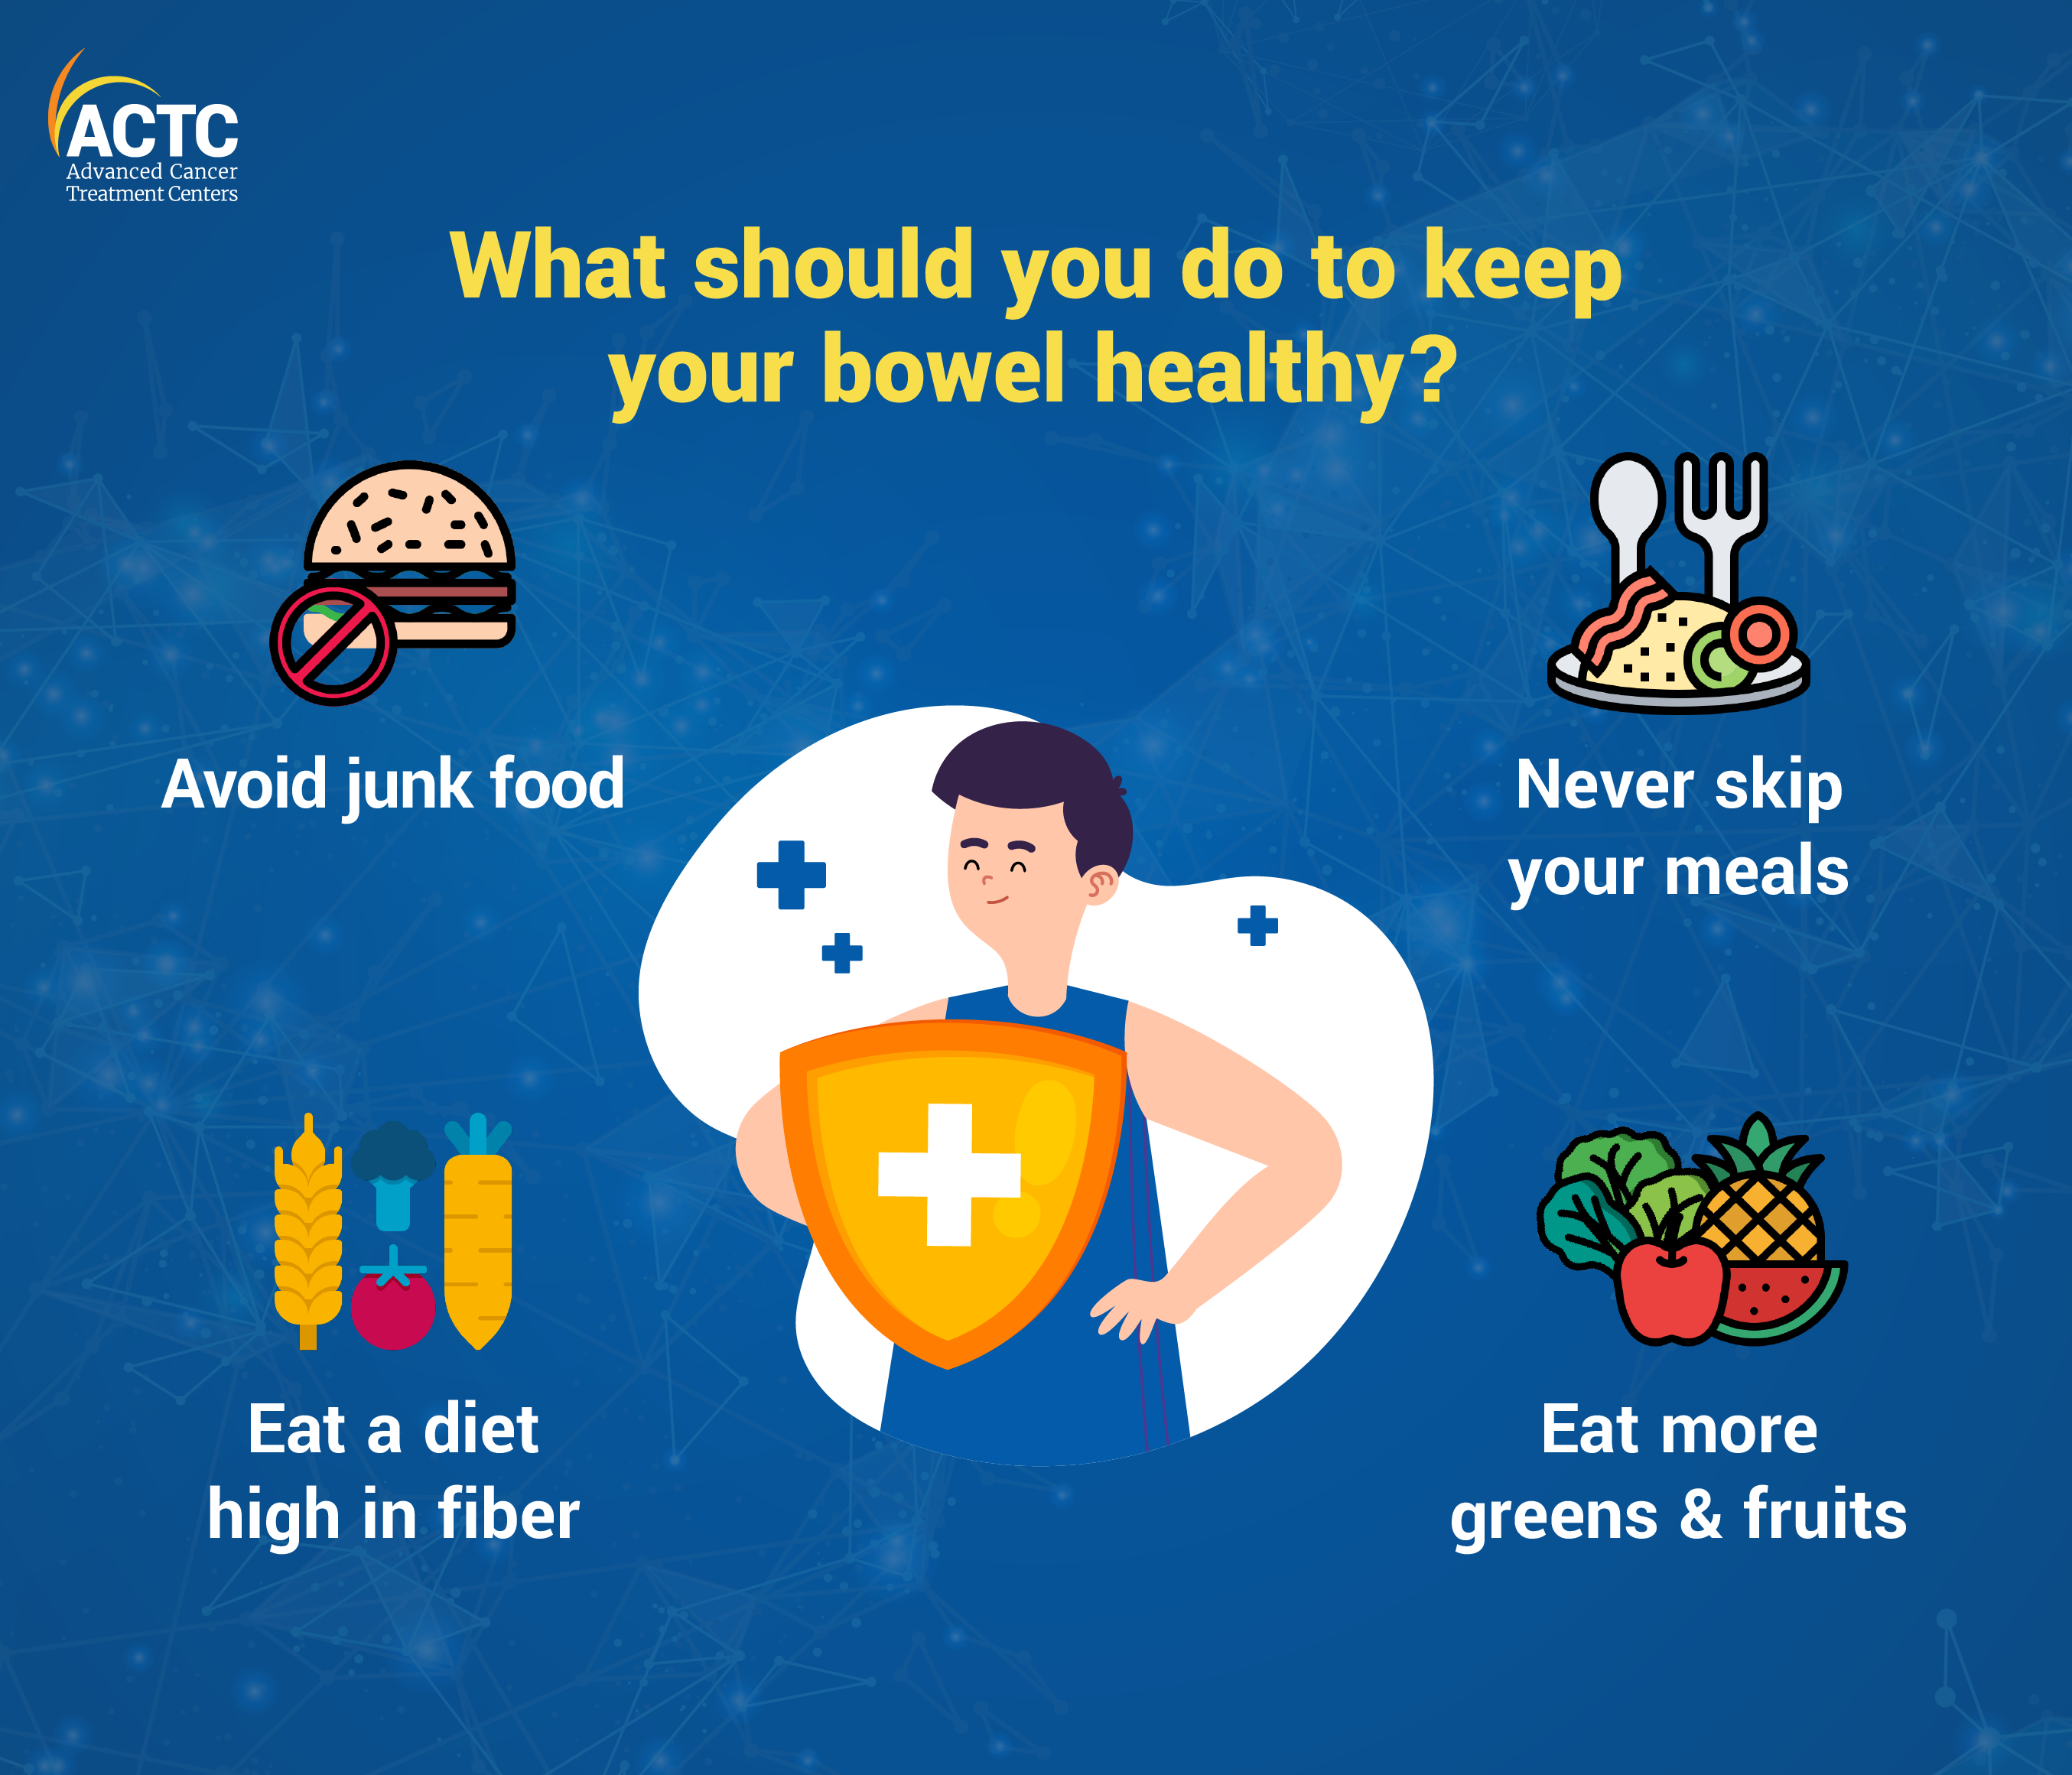 What should you do to keep your bowel healthy